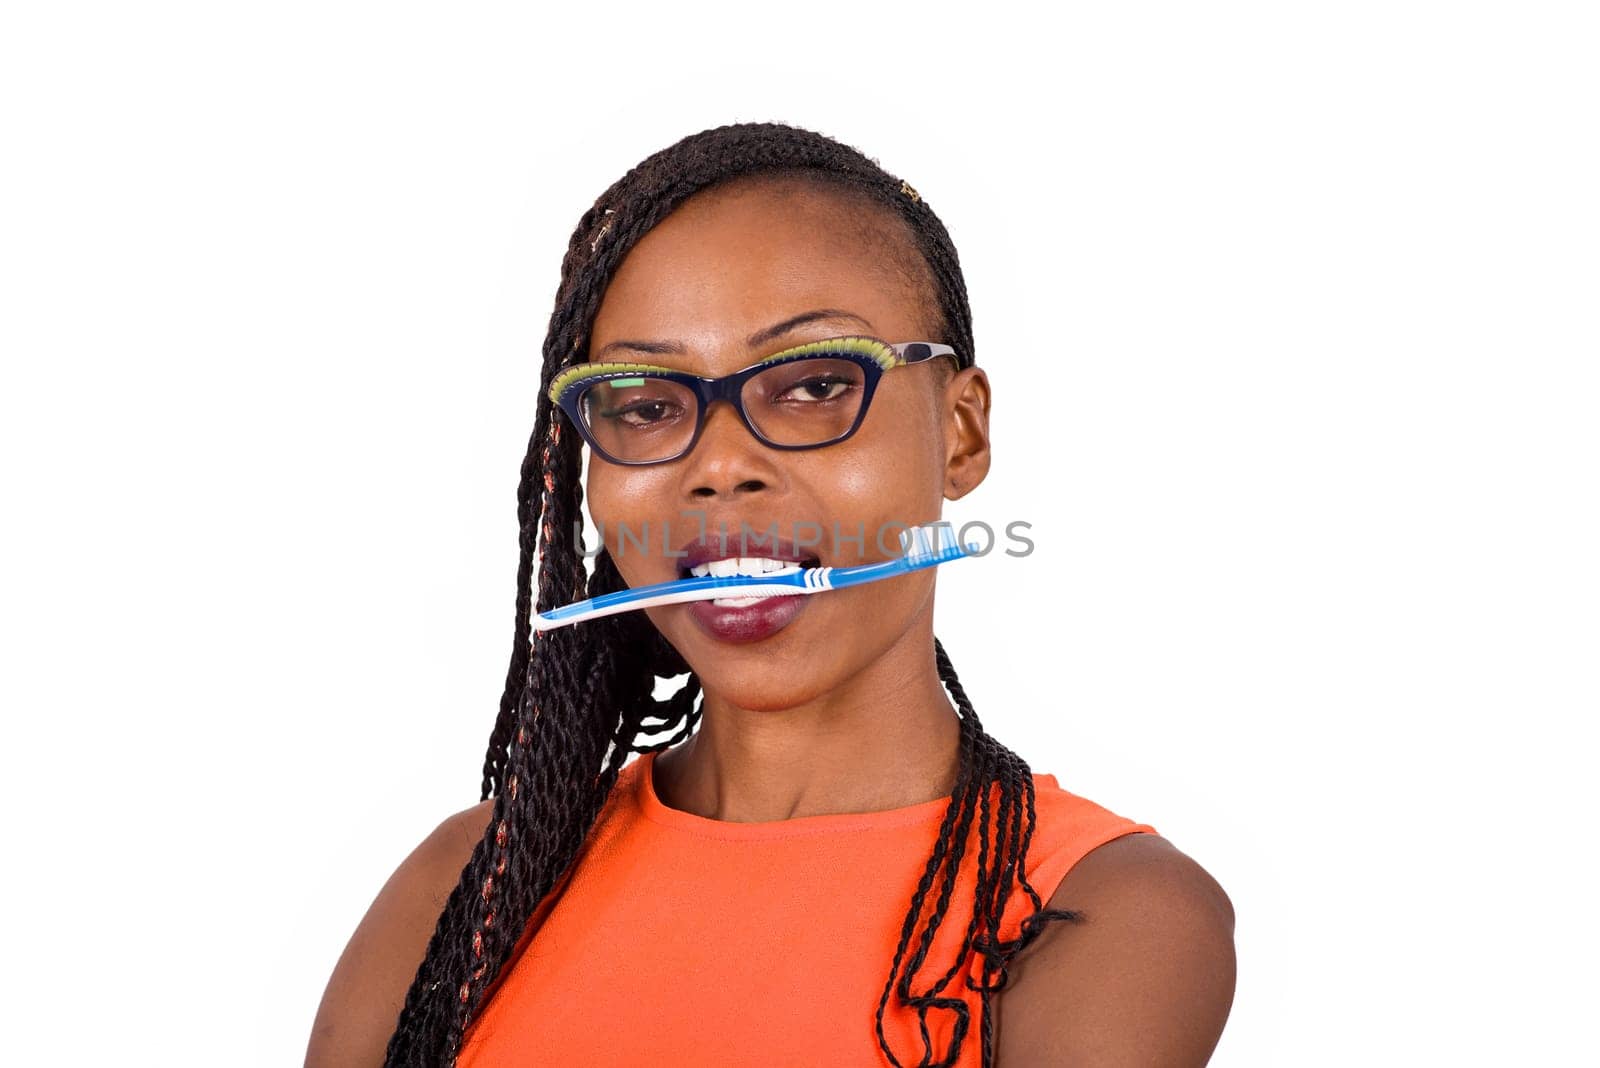 young girl standing in glasses watching the camera while biting a toothbrush.